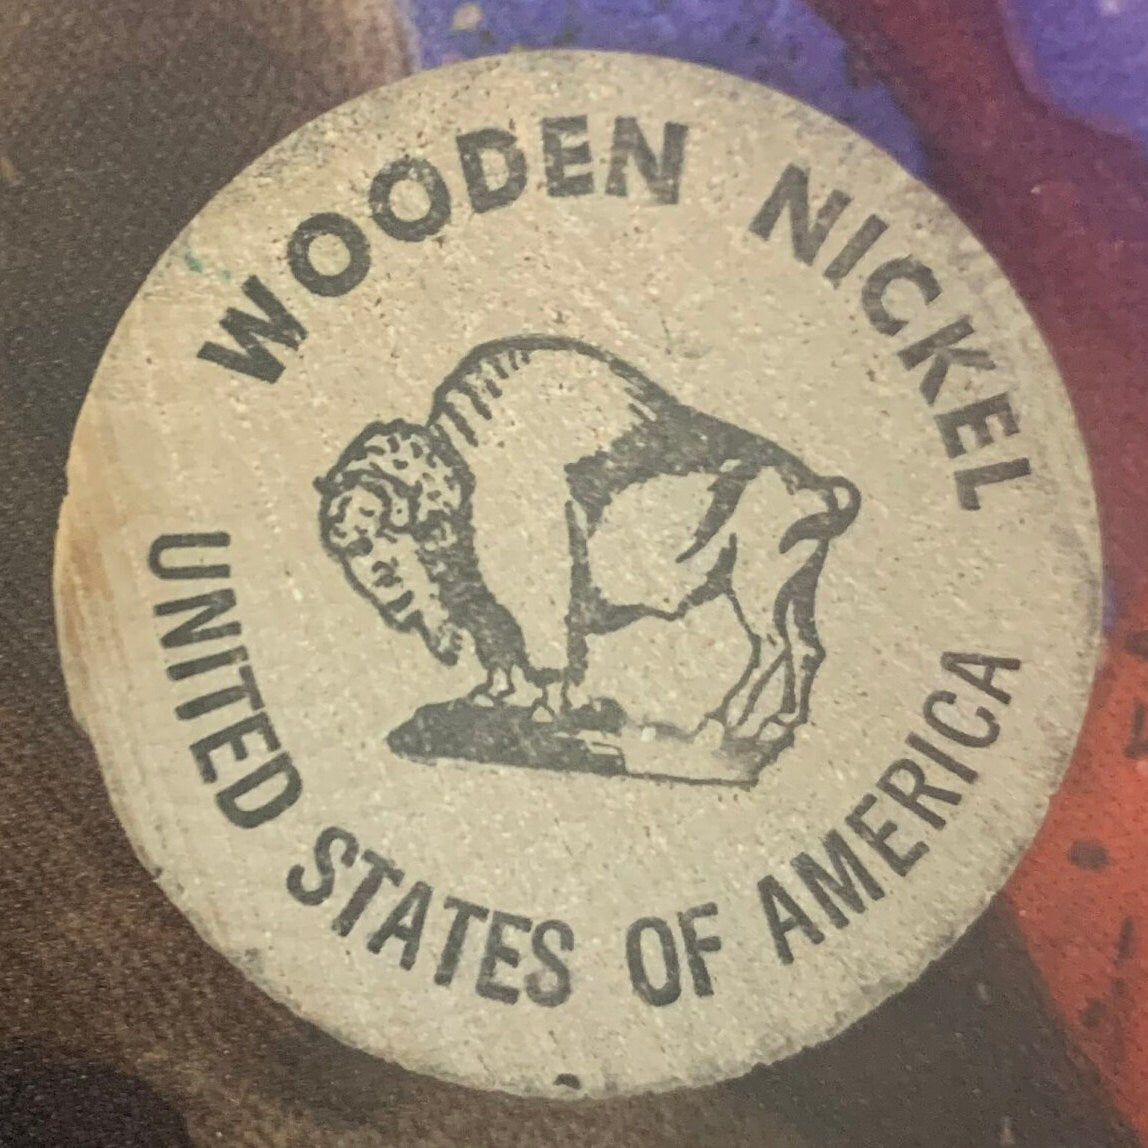 WOODEN NICKEL!- Hilarious - Great Gifts!- Selling out soon.... Buy Now while still available!